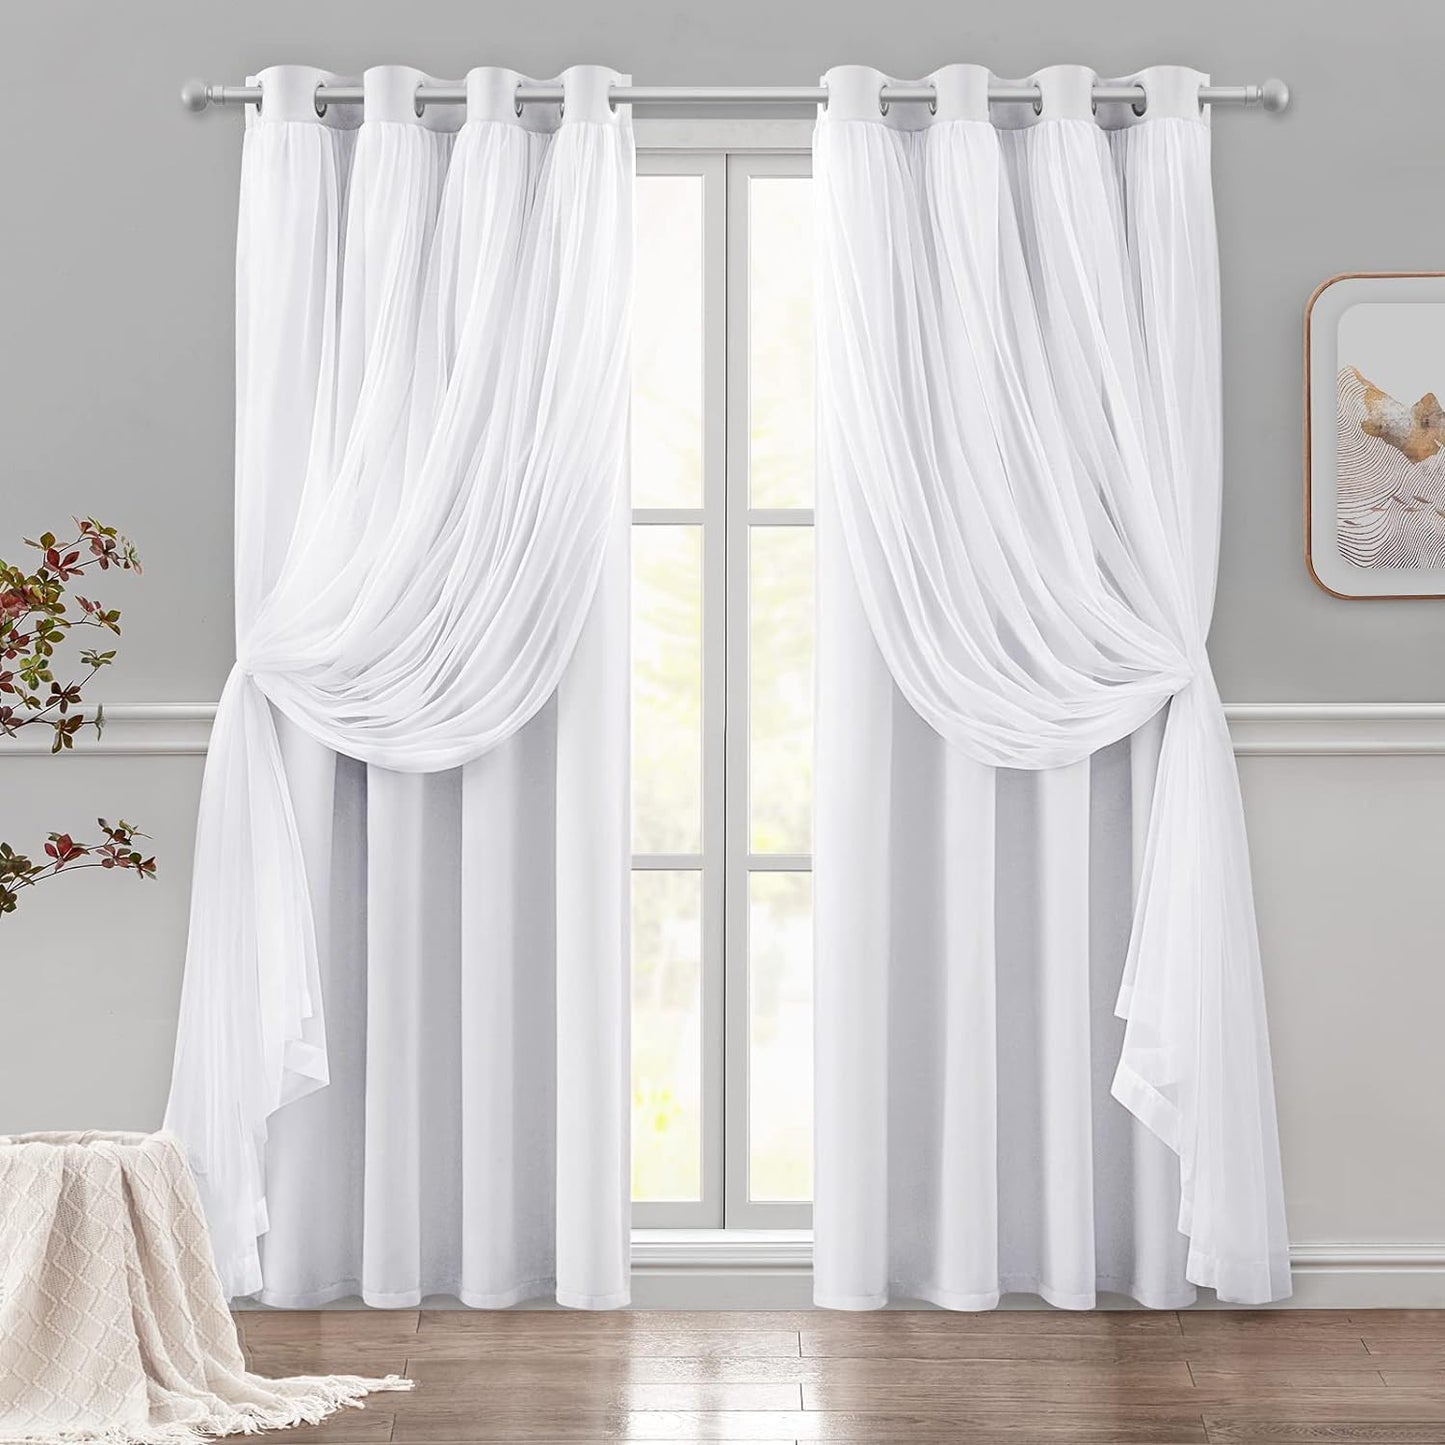 HOMEIDEAS Double Layer Curtains Light Grey Blackout Curtains 84 Inch Length 2 Panels Nursery Curtains for Girls Kids Bedroom Grommet Blackout Curtains with Sheer Overlay  HOMEIDEAS Greyish White 52" X 84" 